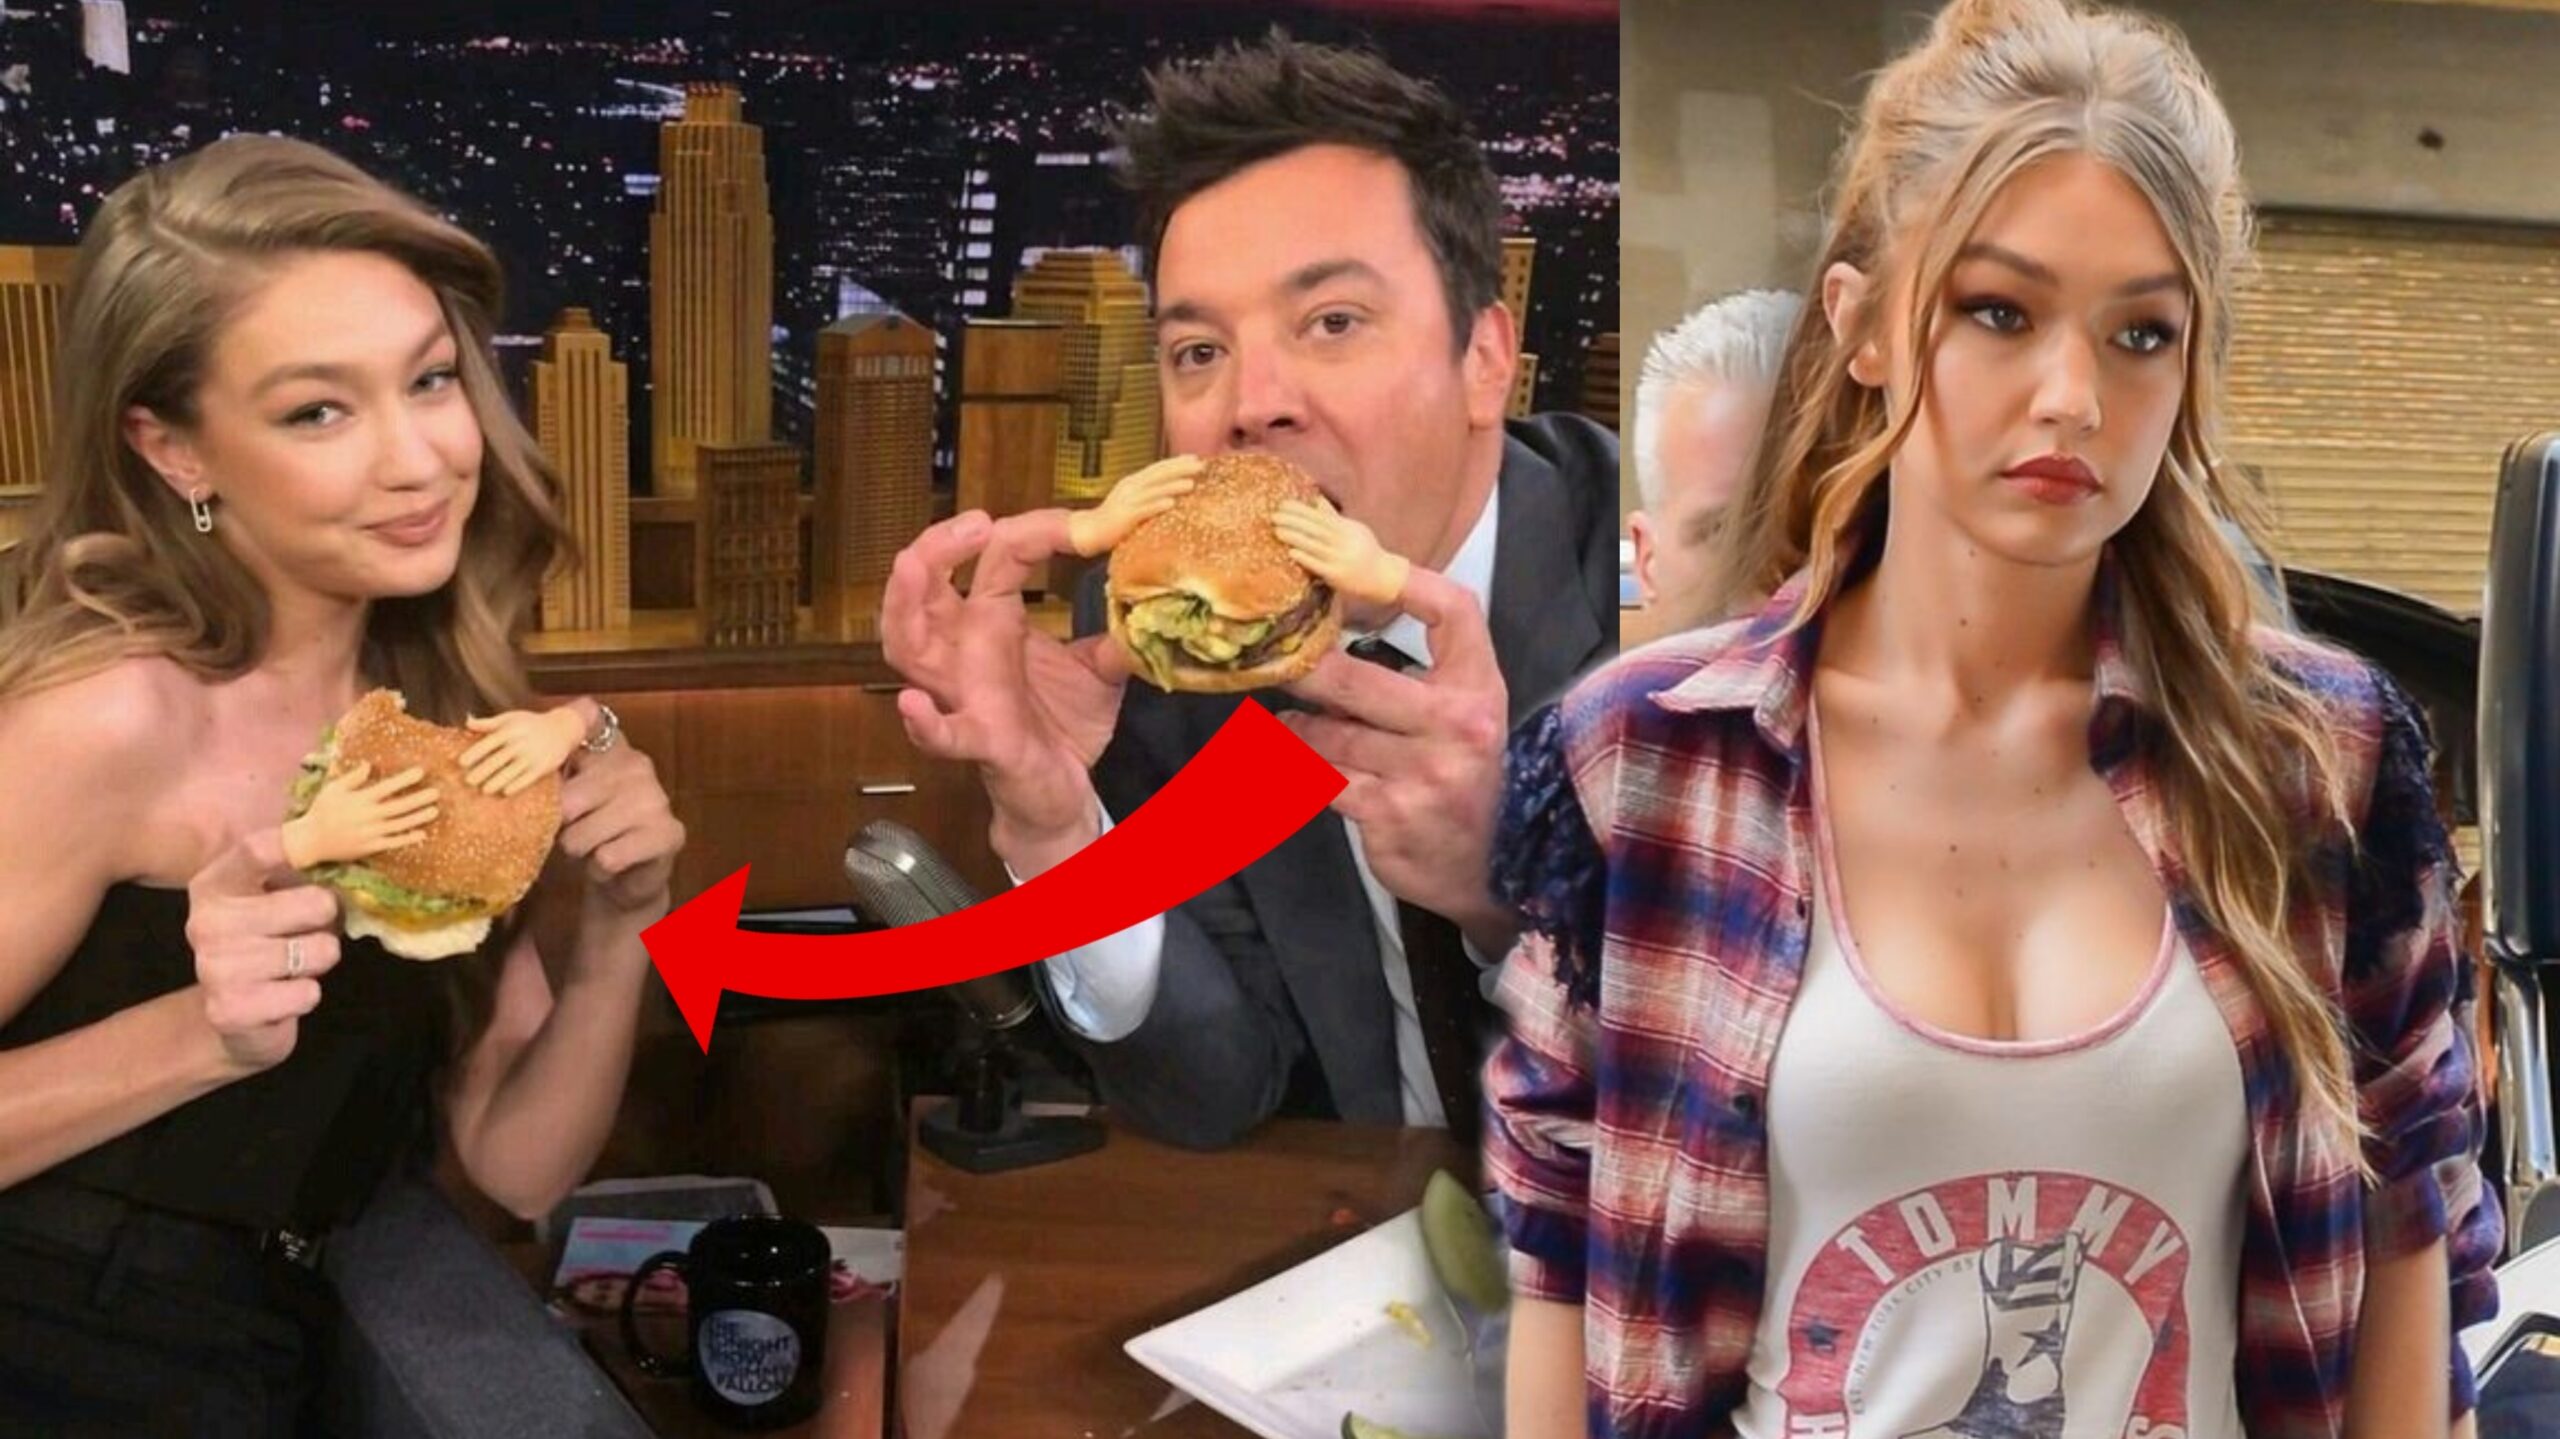 Gigi Hadid Eats Another Burger With Jimmy Fallon on 'Tonight Show